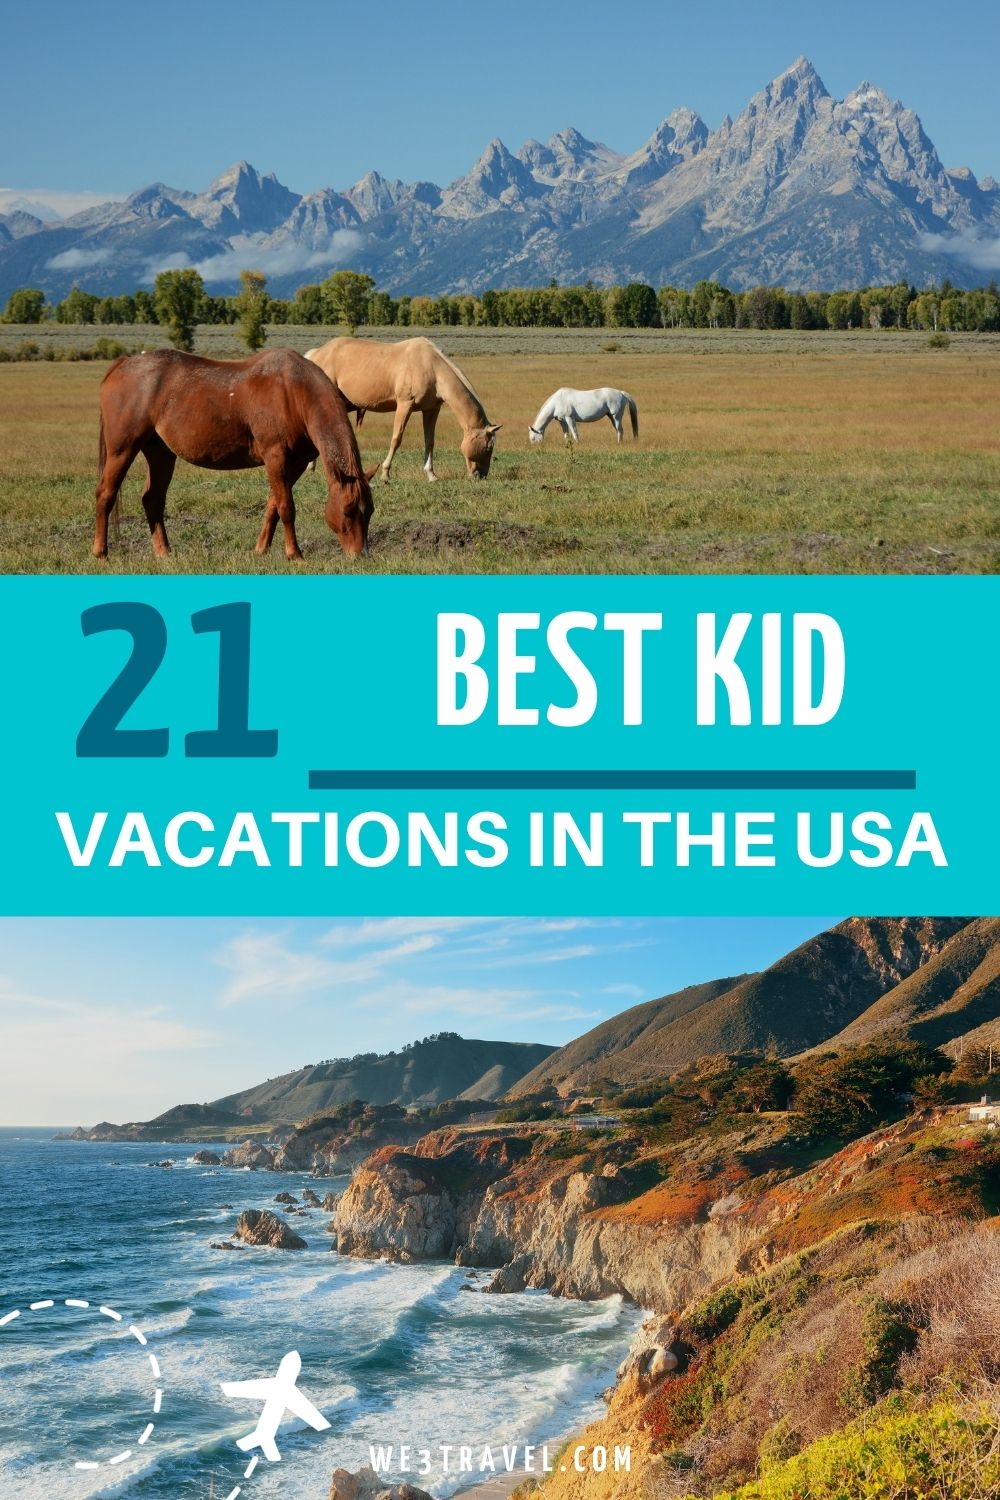 21 Best Kid Vacations in the US